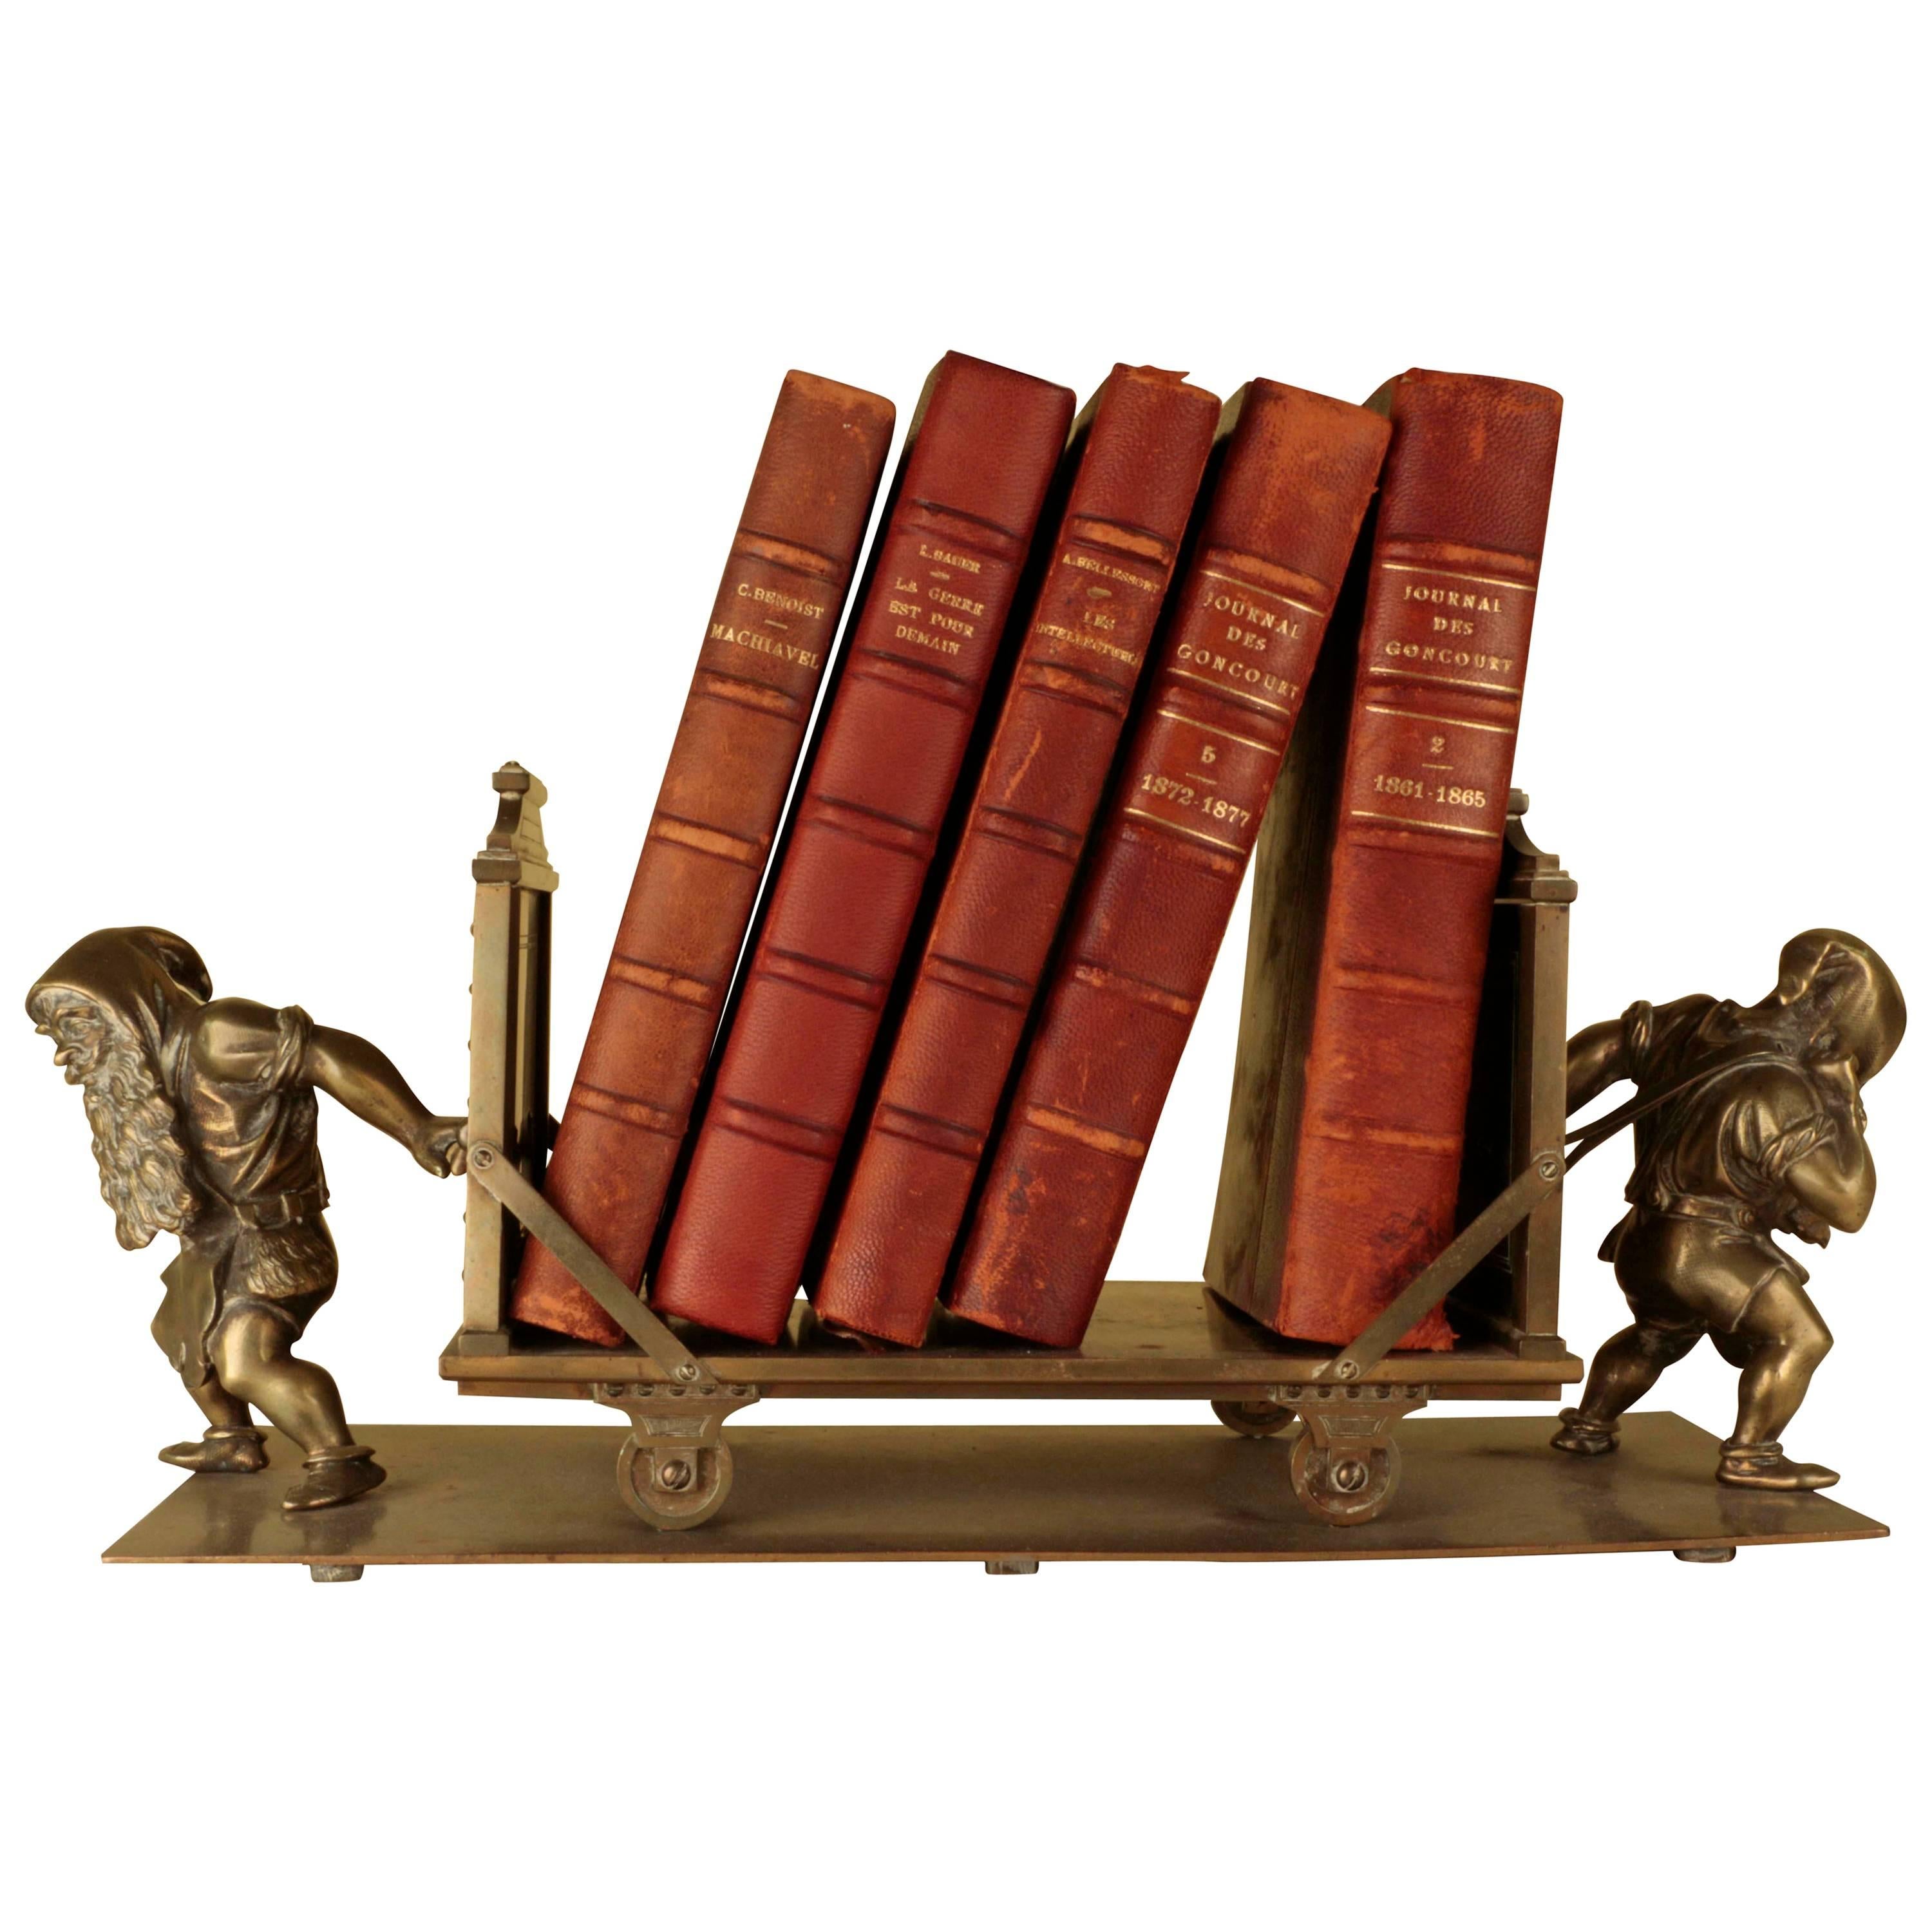 19th Century Continental Desk Top Book Stand